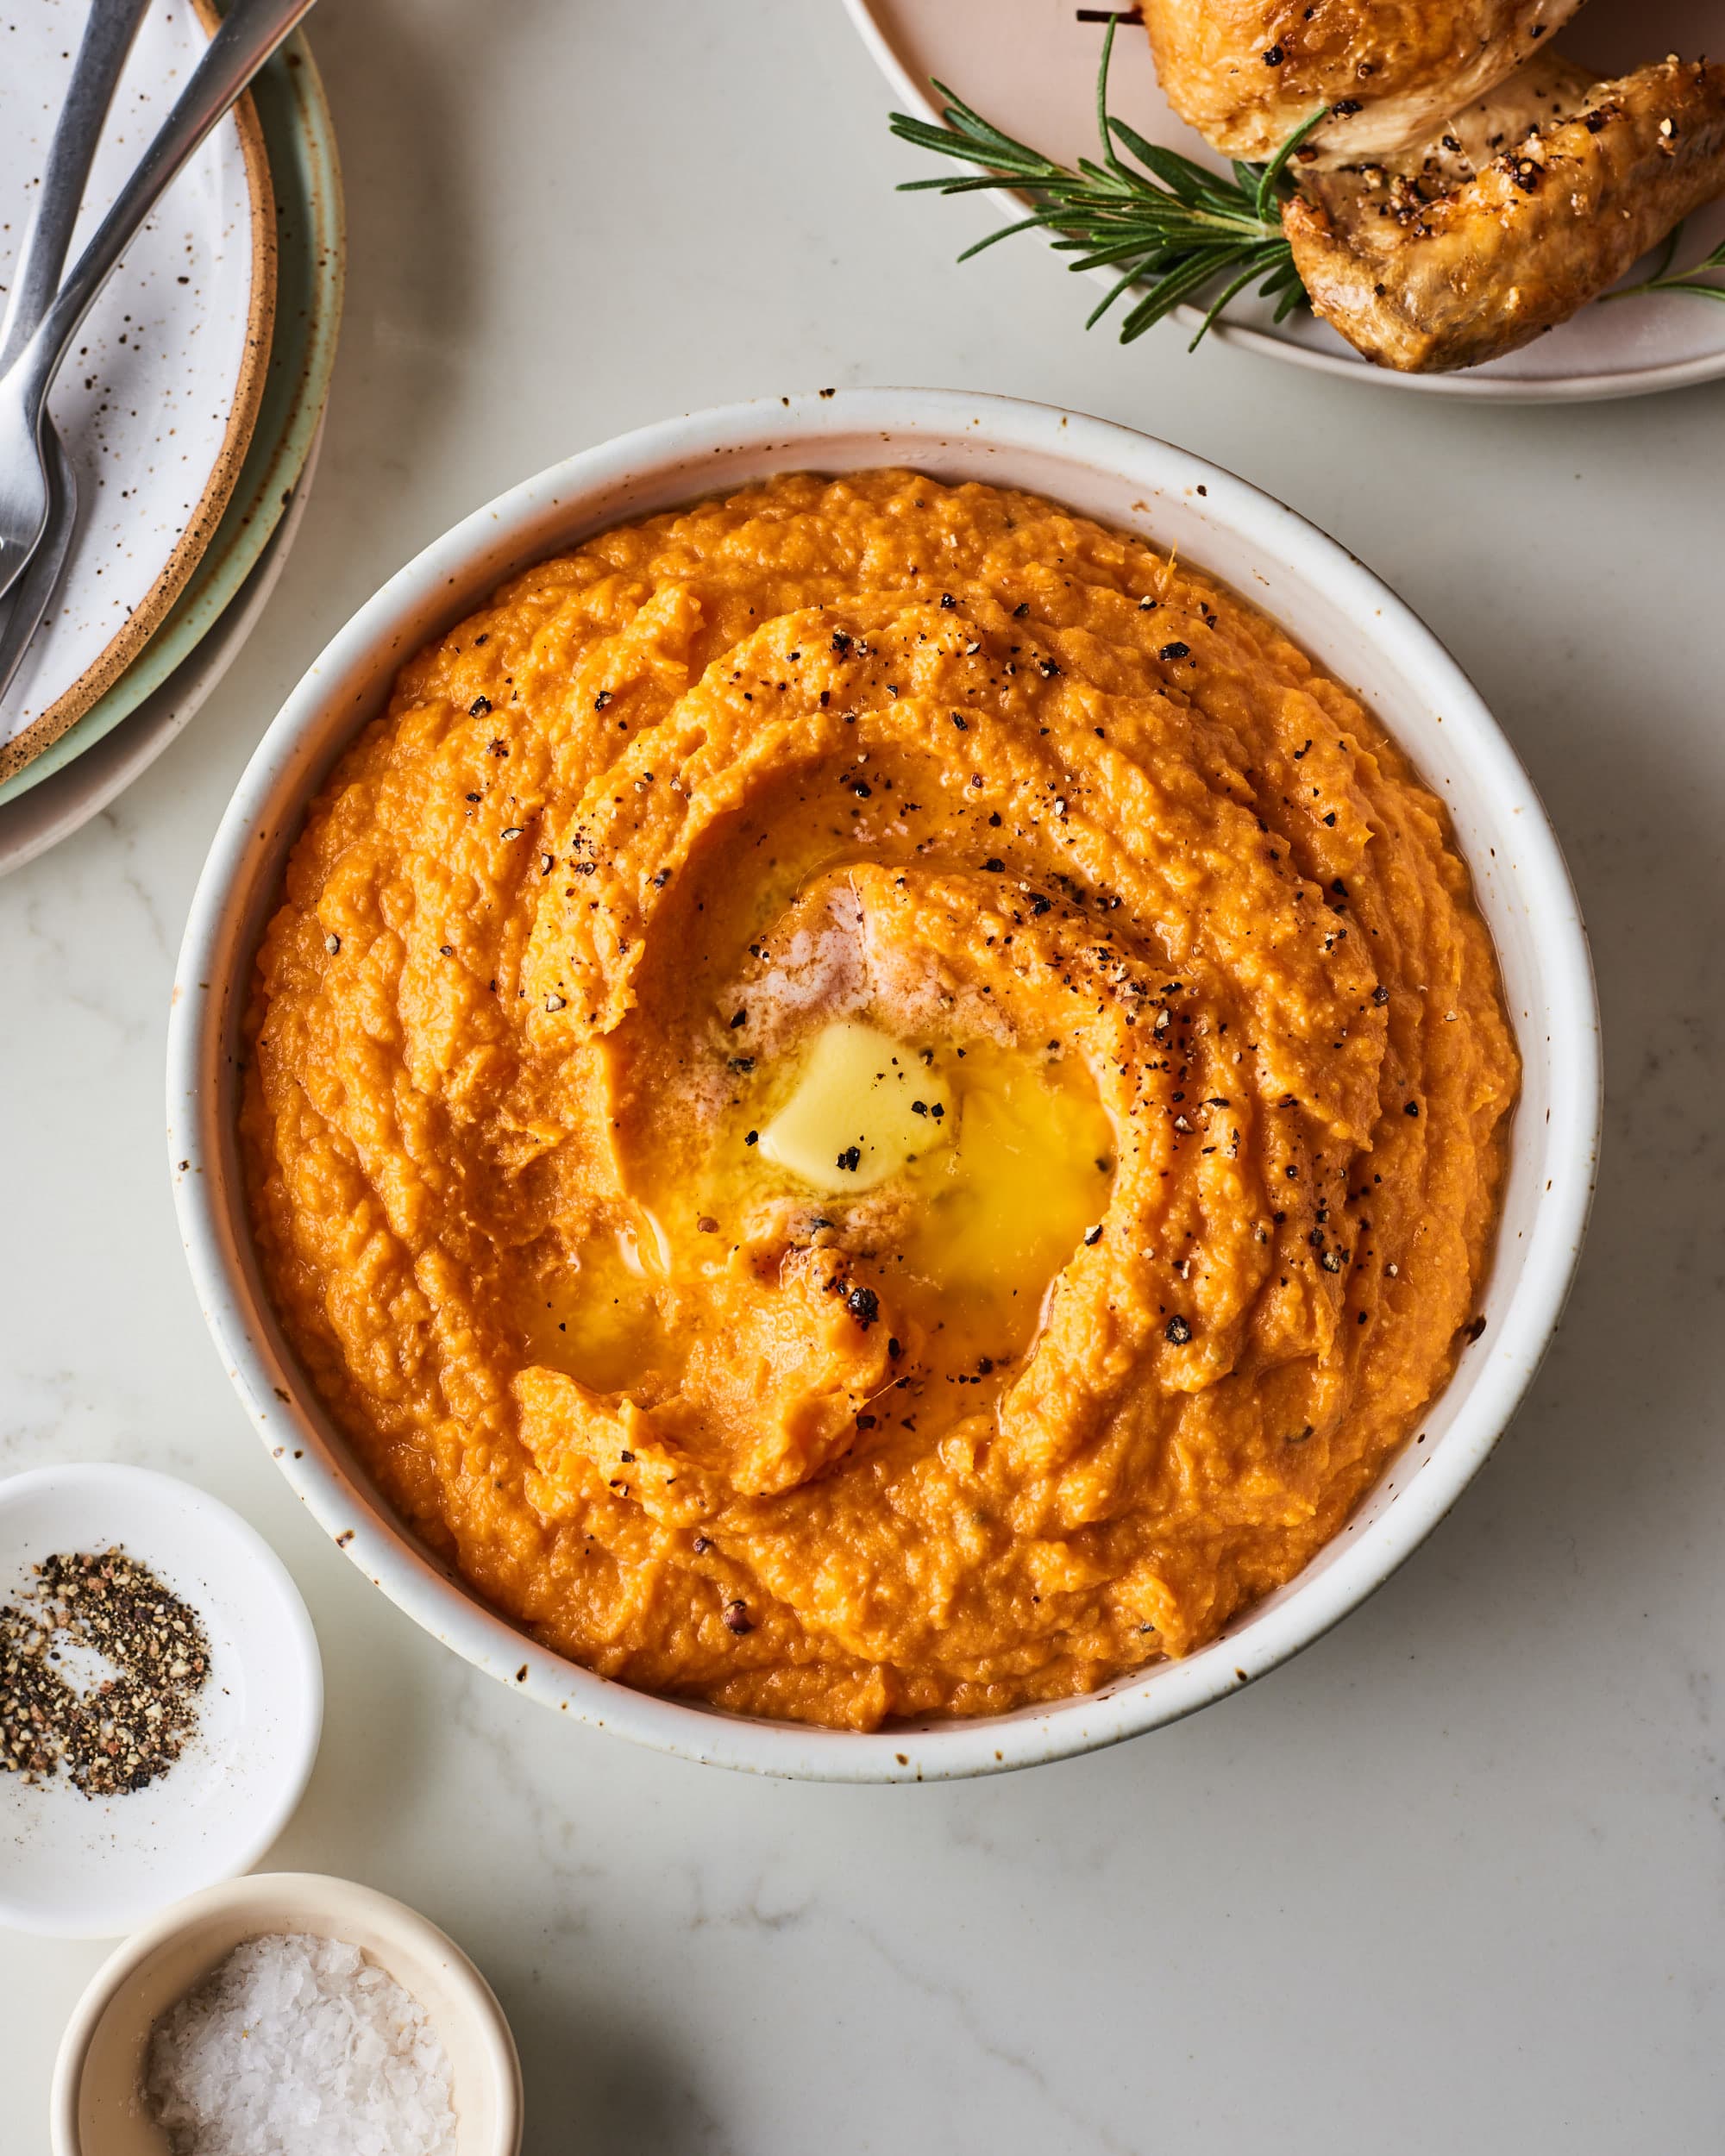 https://cdn.apartmenttherapy.info/image/upload/v1572033973/k/Photo/Recipes/2019-11-how-to-mashed-sweet-potatoes/2019-10-21_Kitchn88397_HT-Best-Mashed-Sweet-Potatoes.jpg